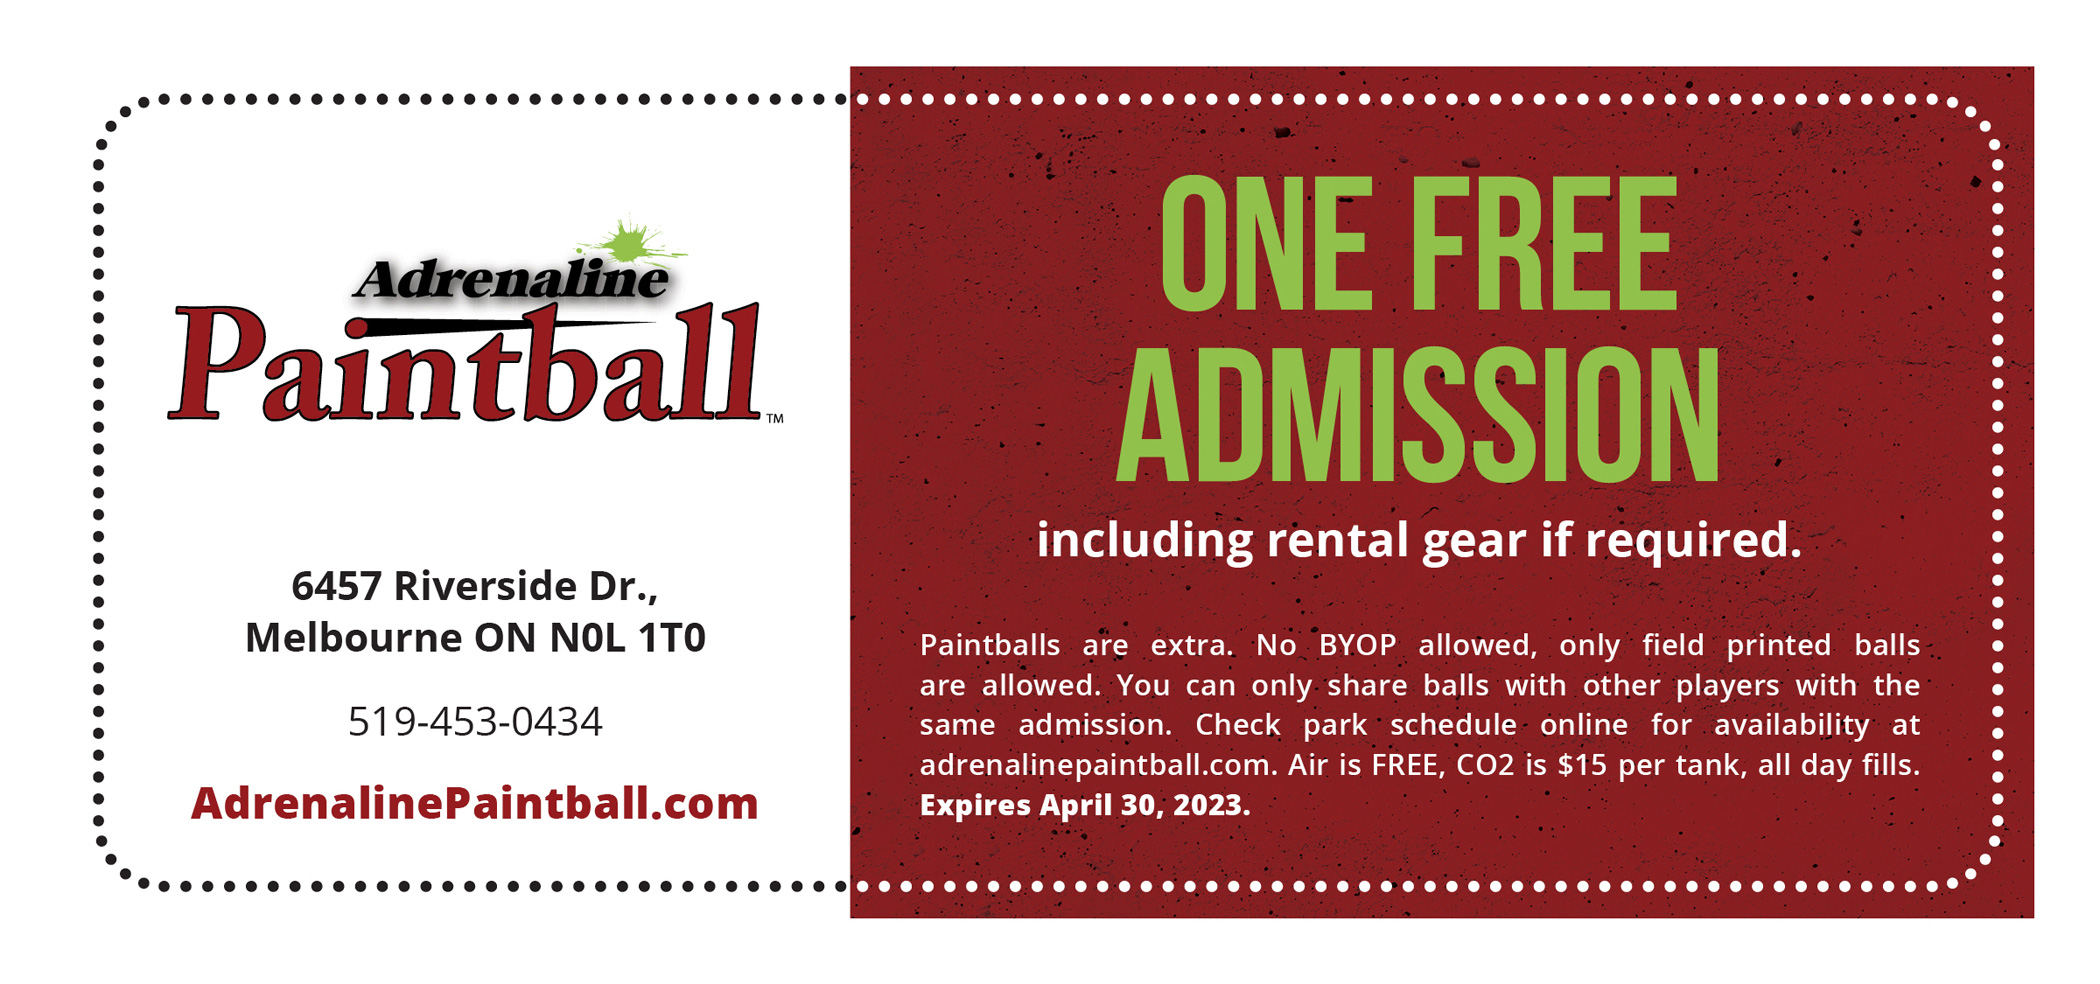 One free admission including rental gear if required